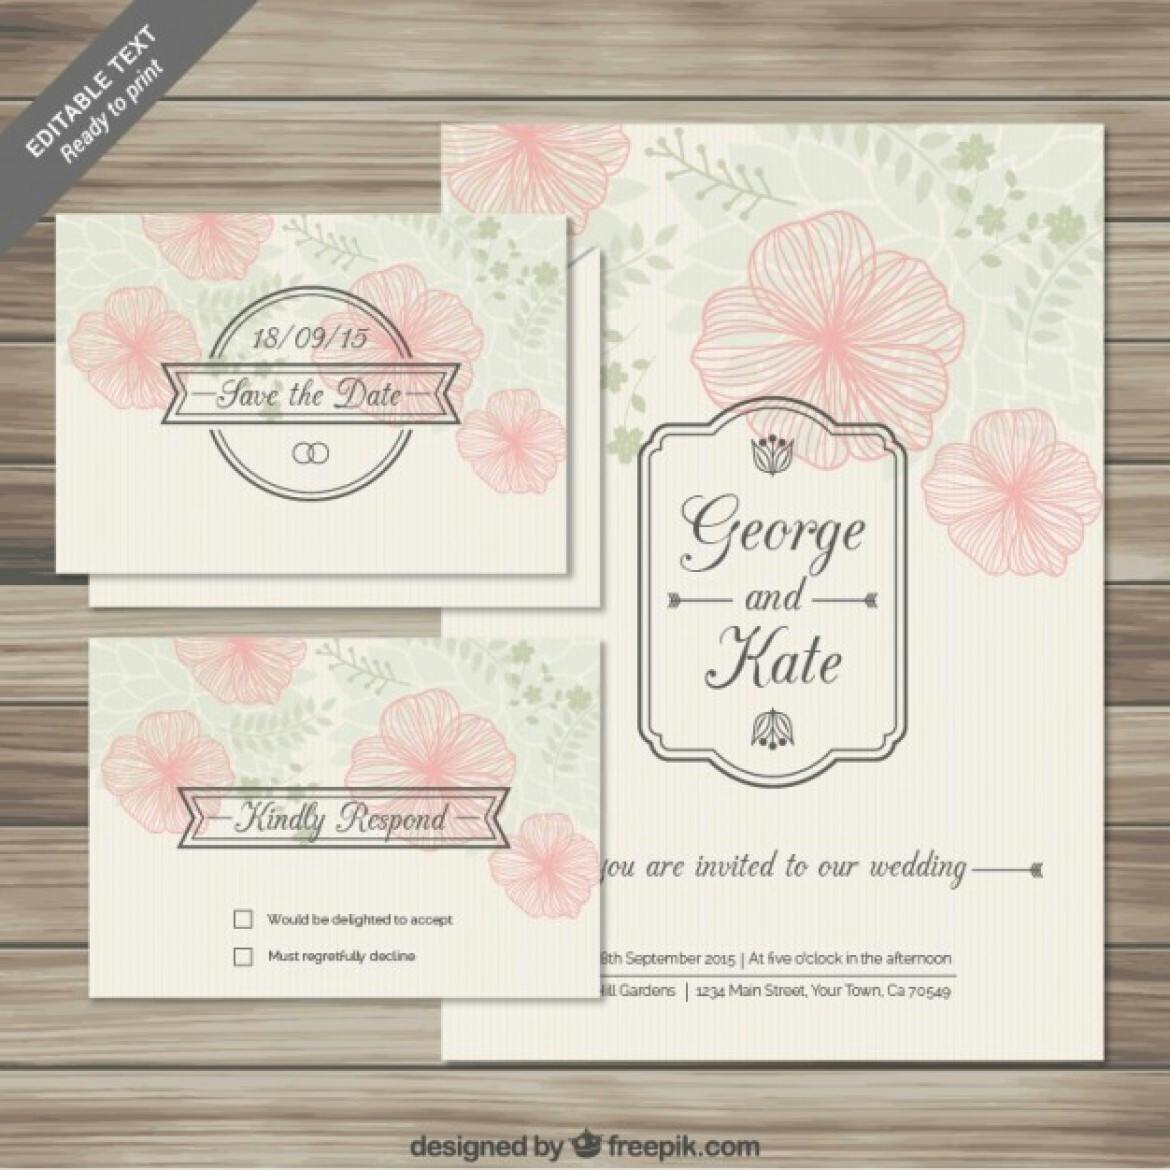 wpid-floral-wedding-invitations-cards-in-sketchy-style_23-2147510040-1170x1170